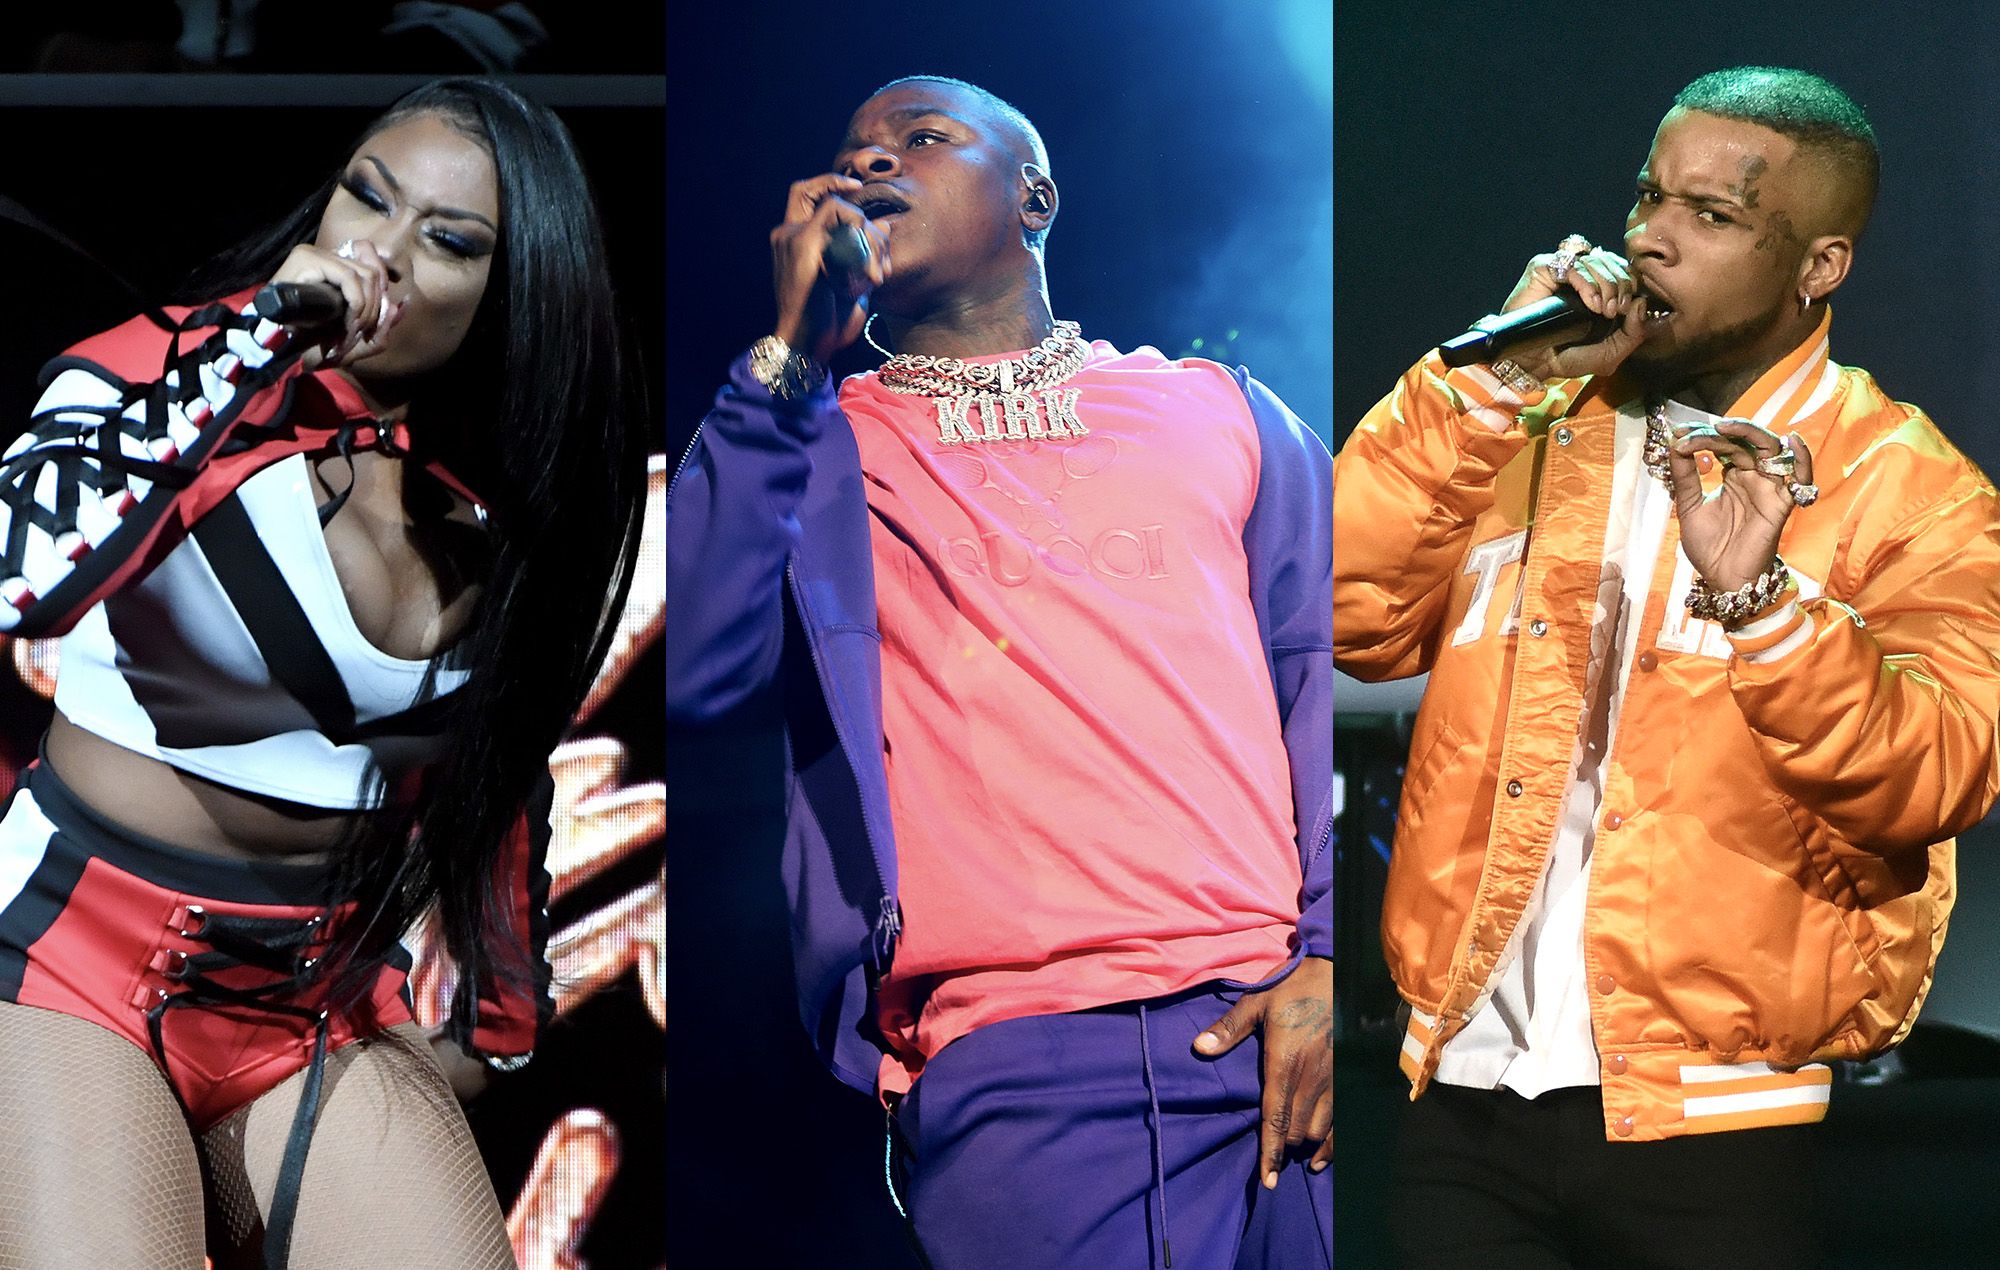 DaBaby faces criticism for collaborating with Tory Lanez on new song, Megan Thee Stallion responds